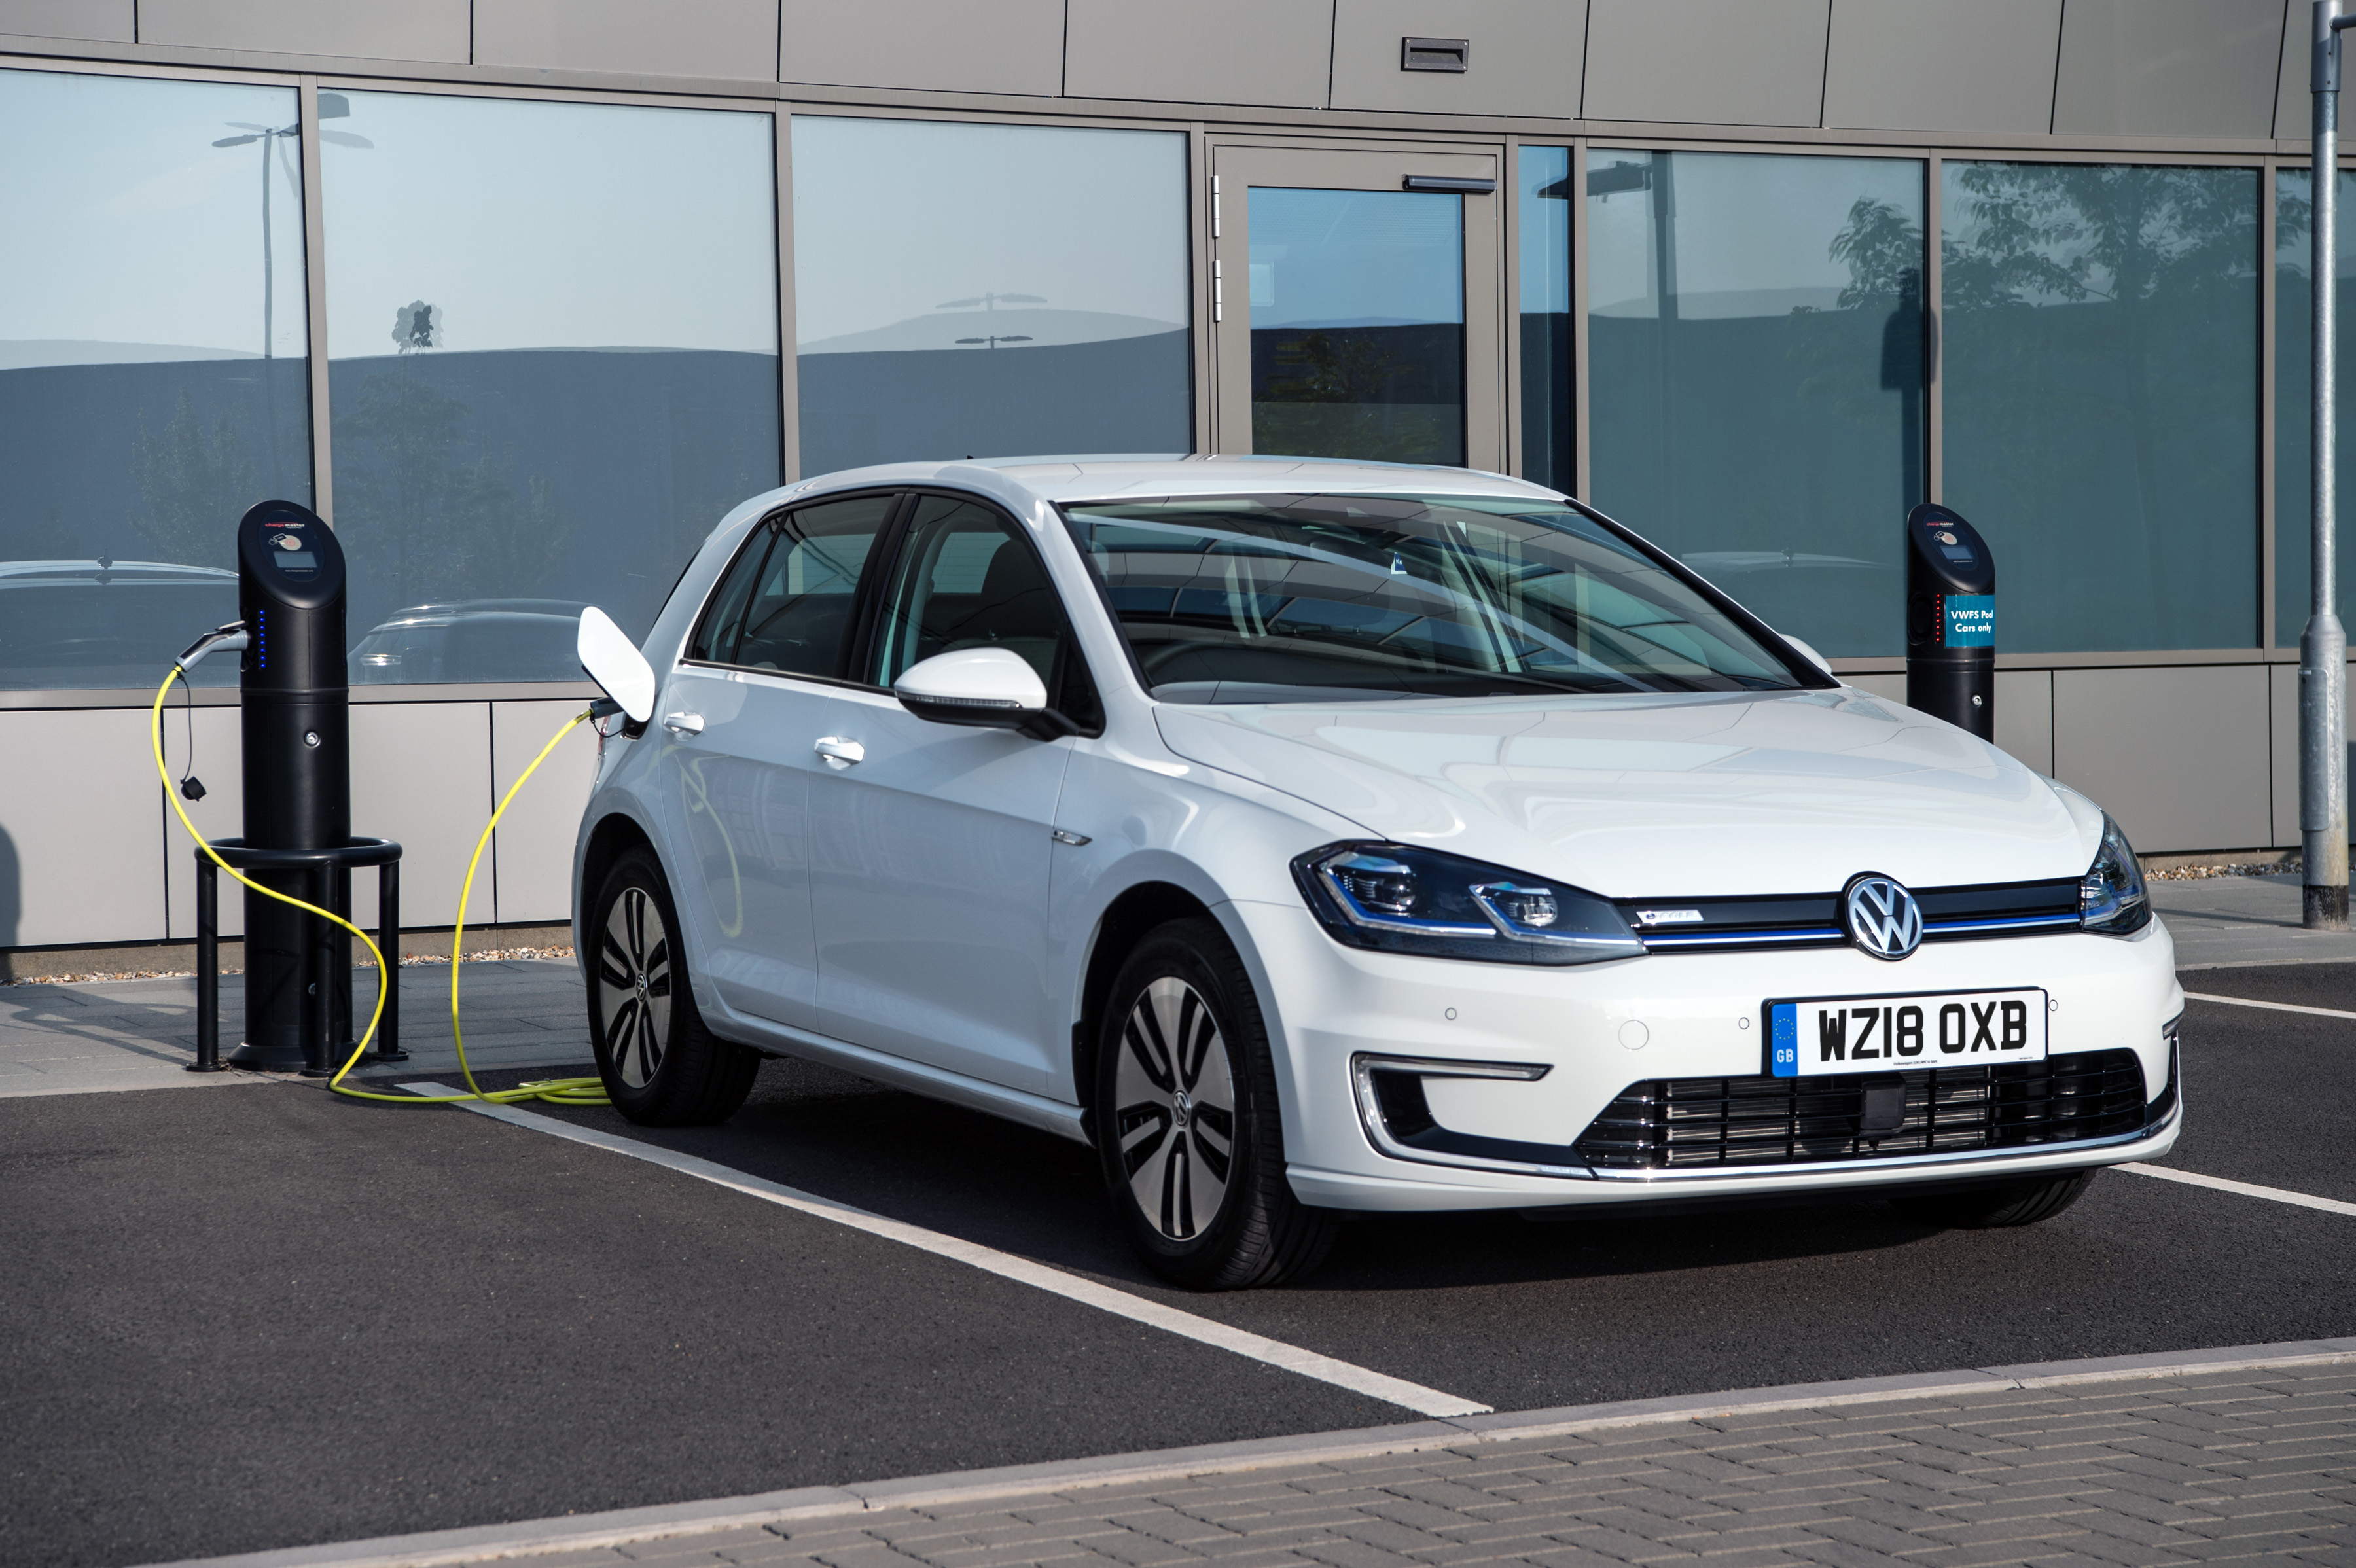 The e-Golf provides practicality as well as zero-emissions driving